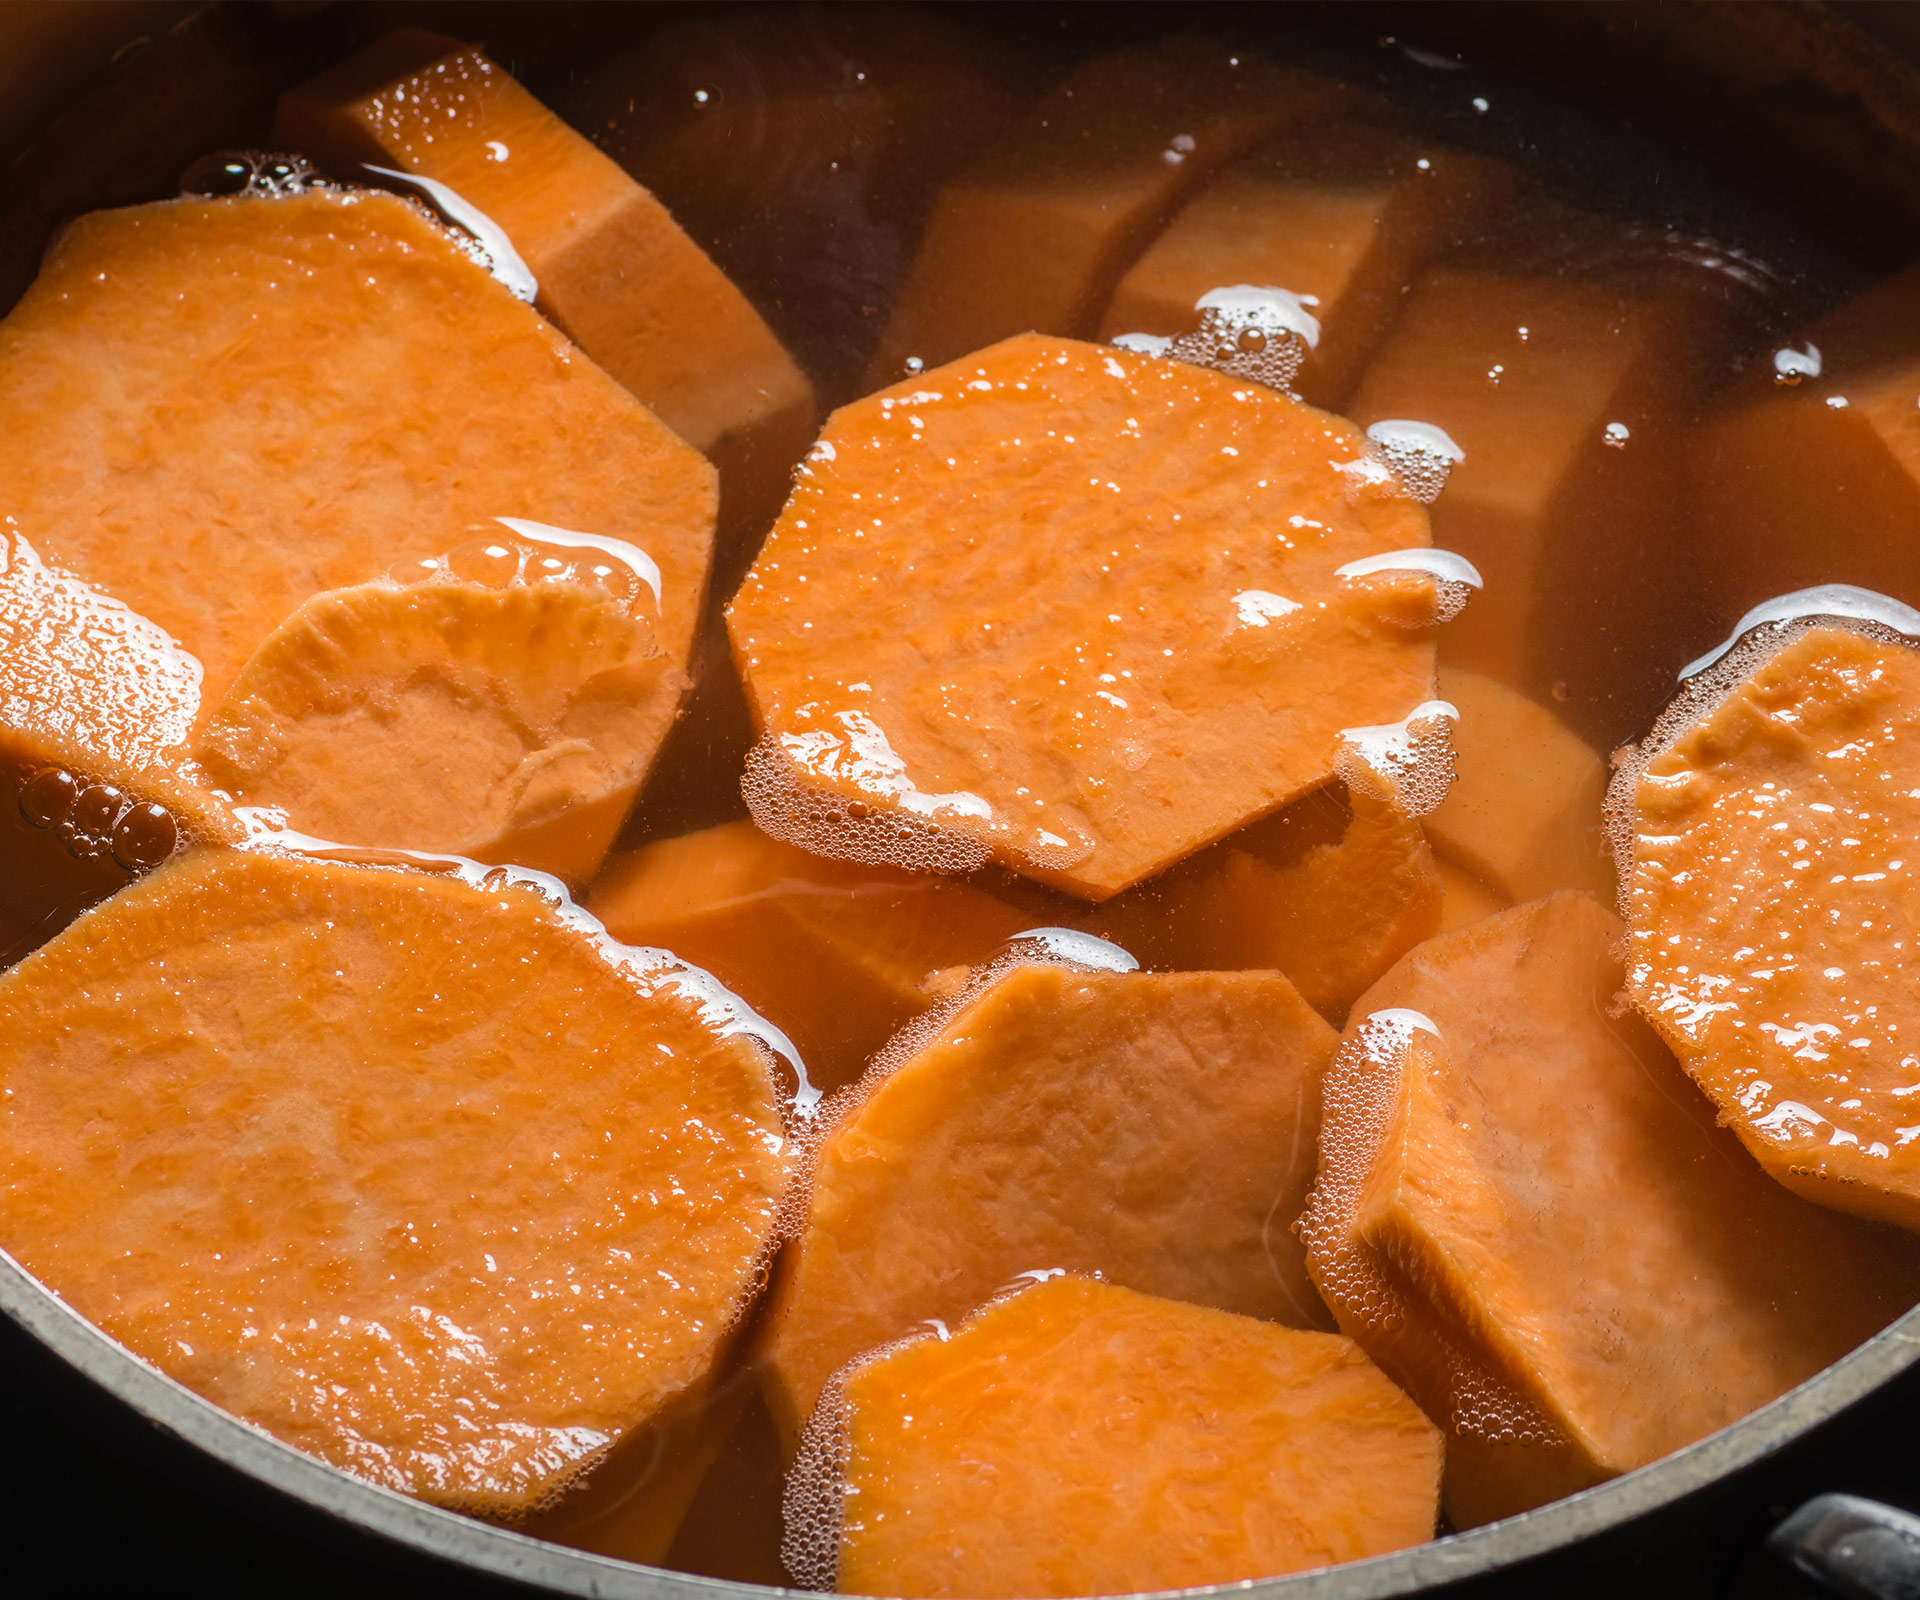 Sweet potato wastewater may aid weight loss and digestion